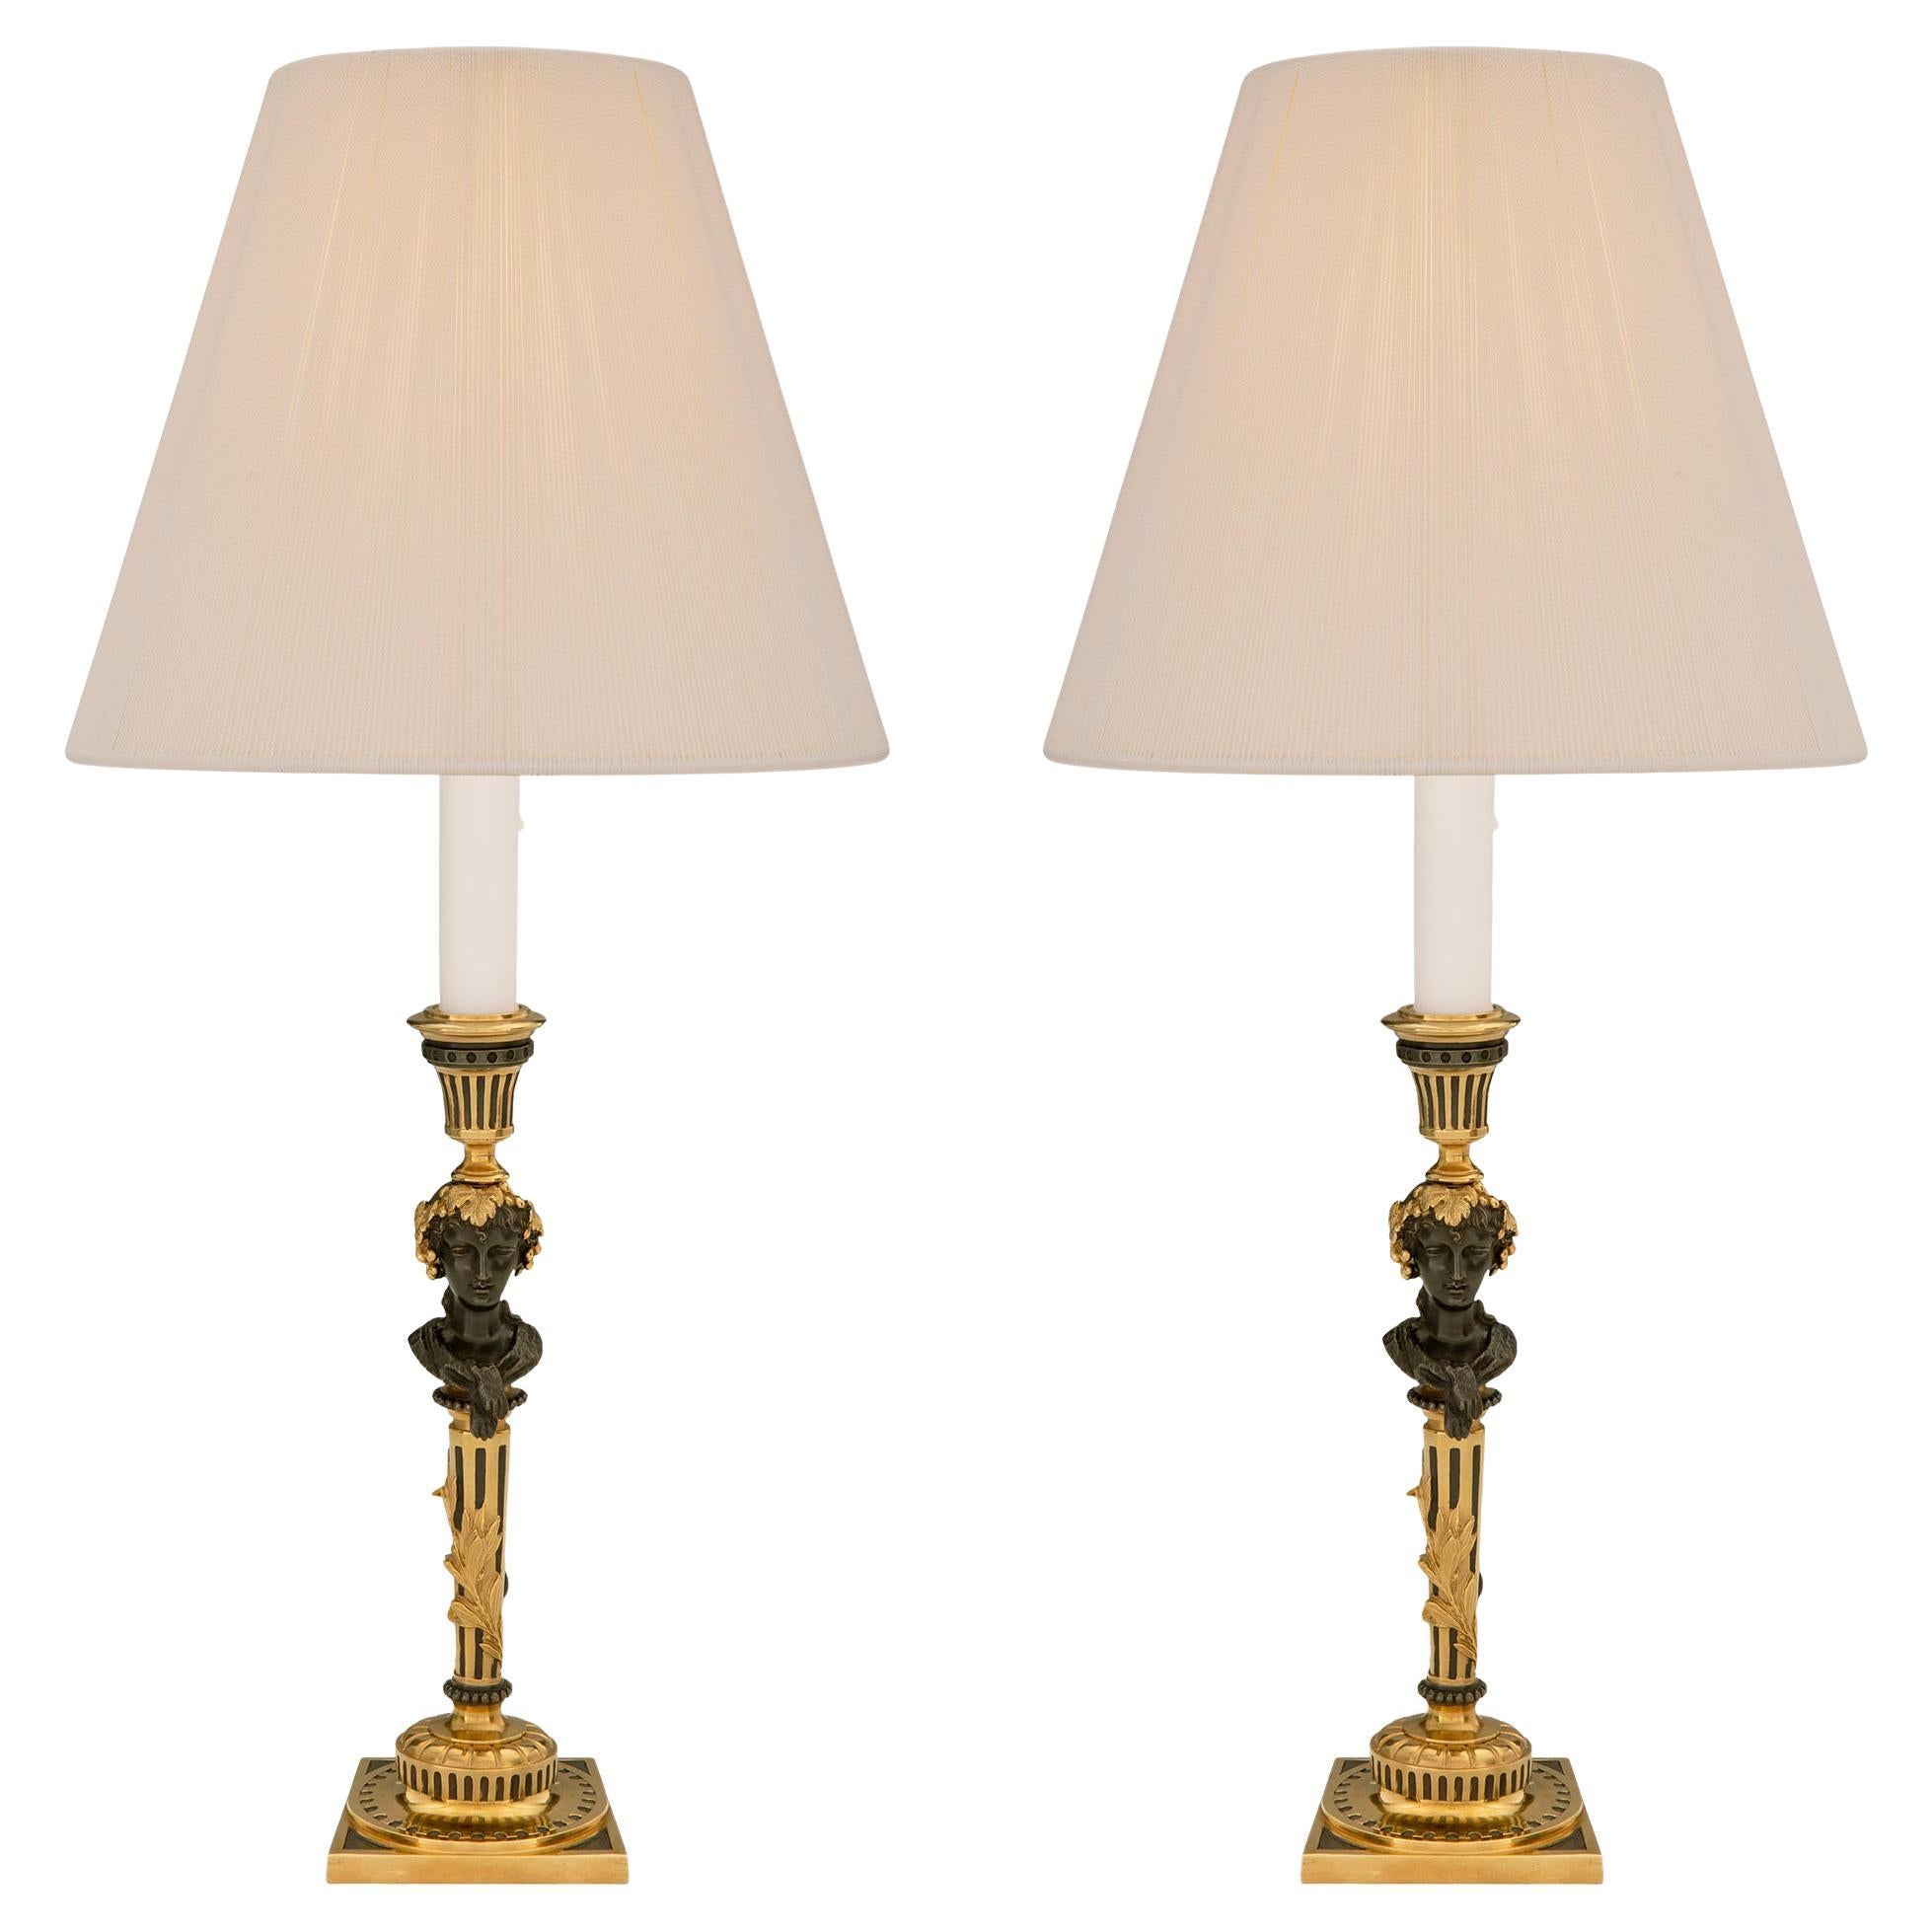 Pair of French 19th Century Louis XVI Style Ormolu and Bronze Candlestick Lamps